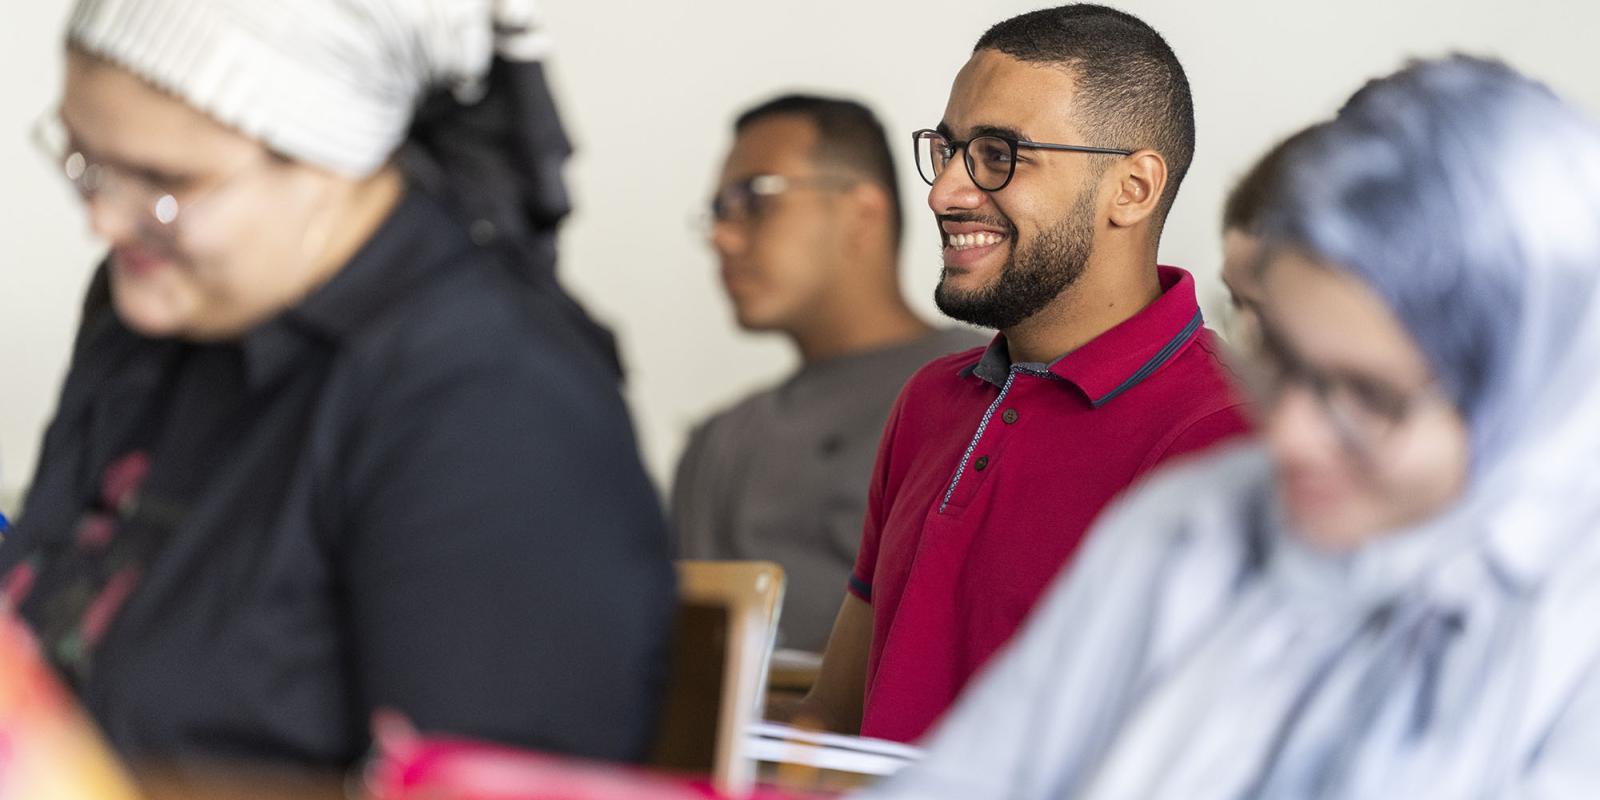 A boy sitting in class with glasses smiling 